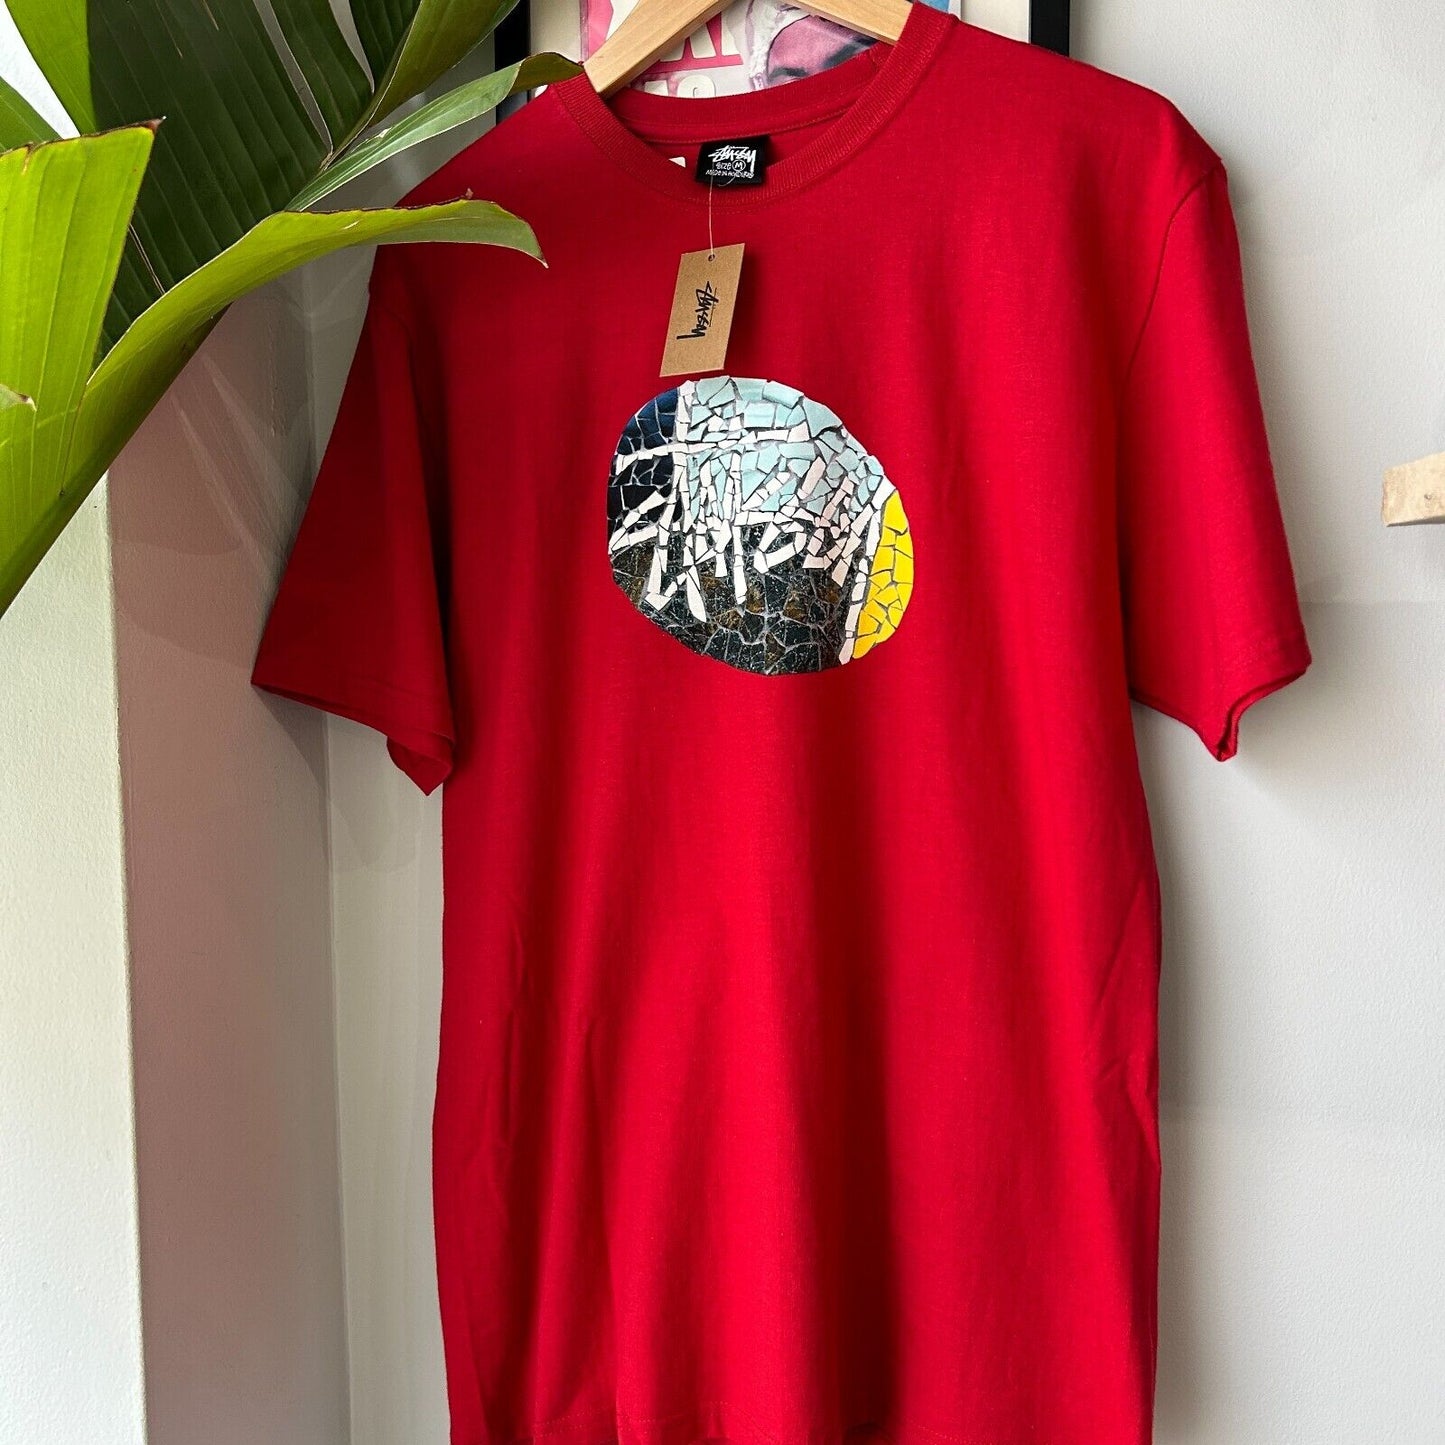 STUSSY Mosaic Tile Logo Red T-Shirt sz M Adult New With Tags